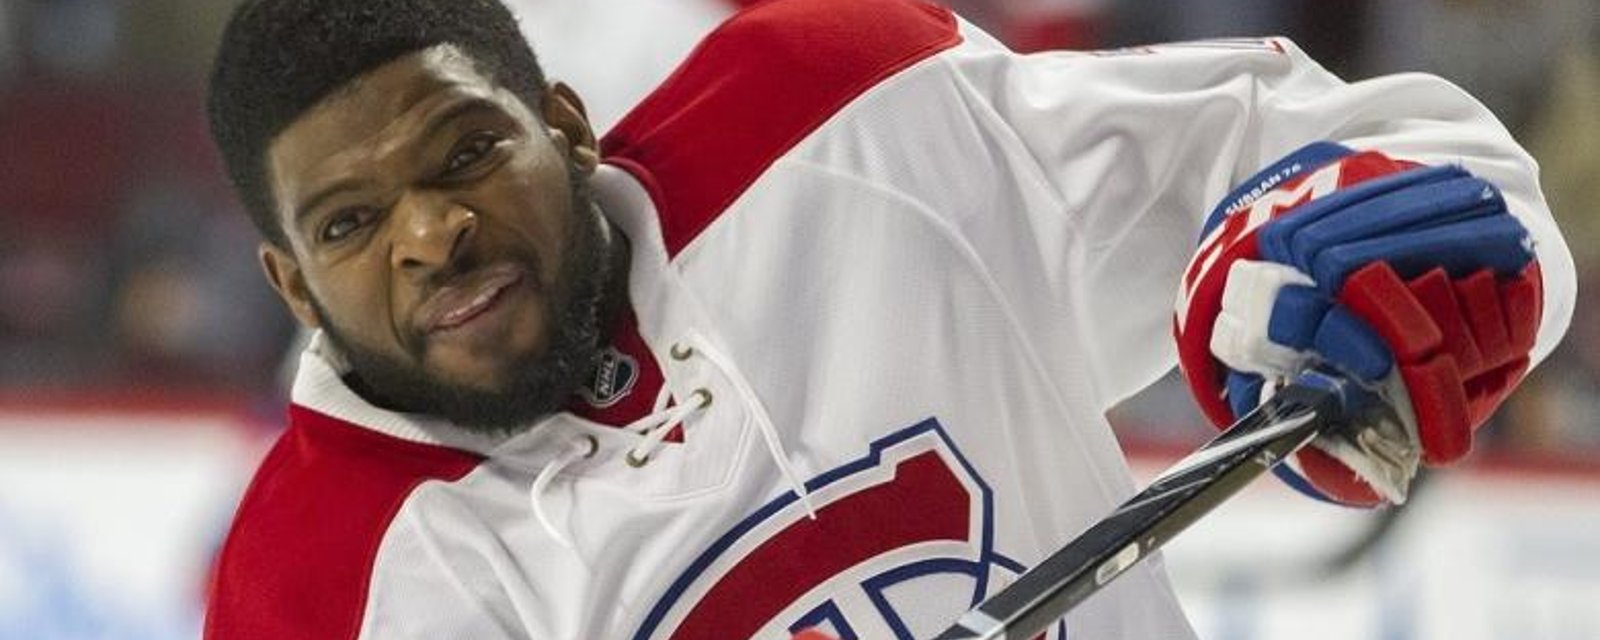 P.K. Subban fires off shots at the Canadiens after today's blockbuster trade!